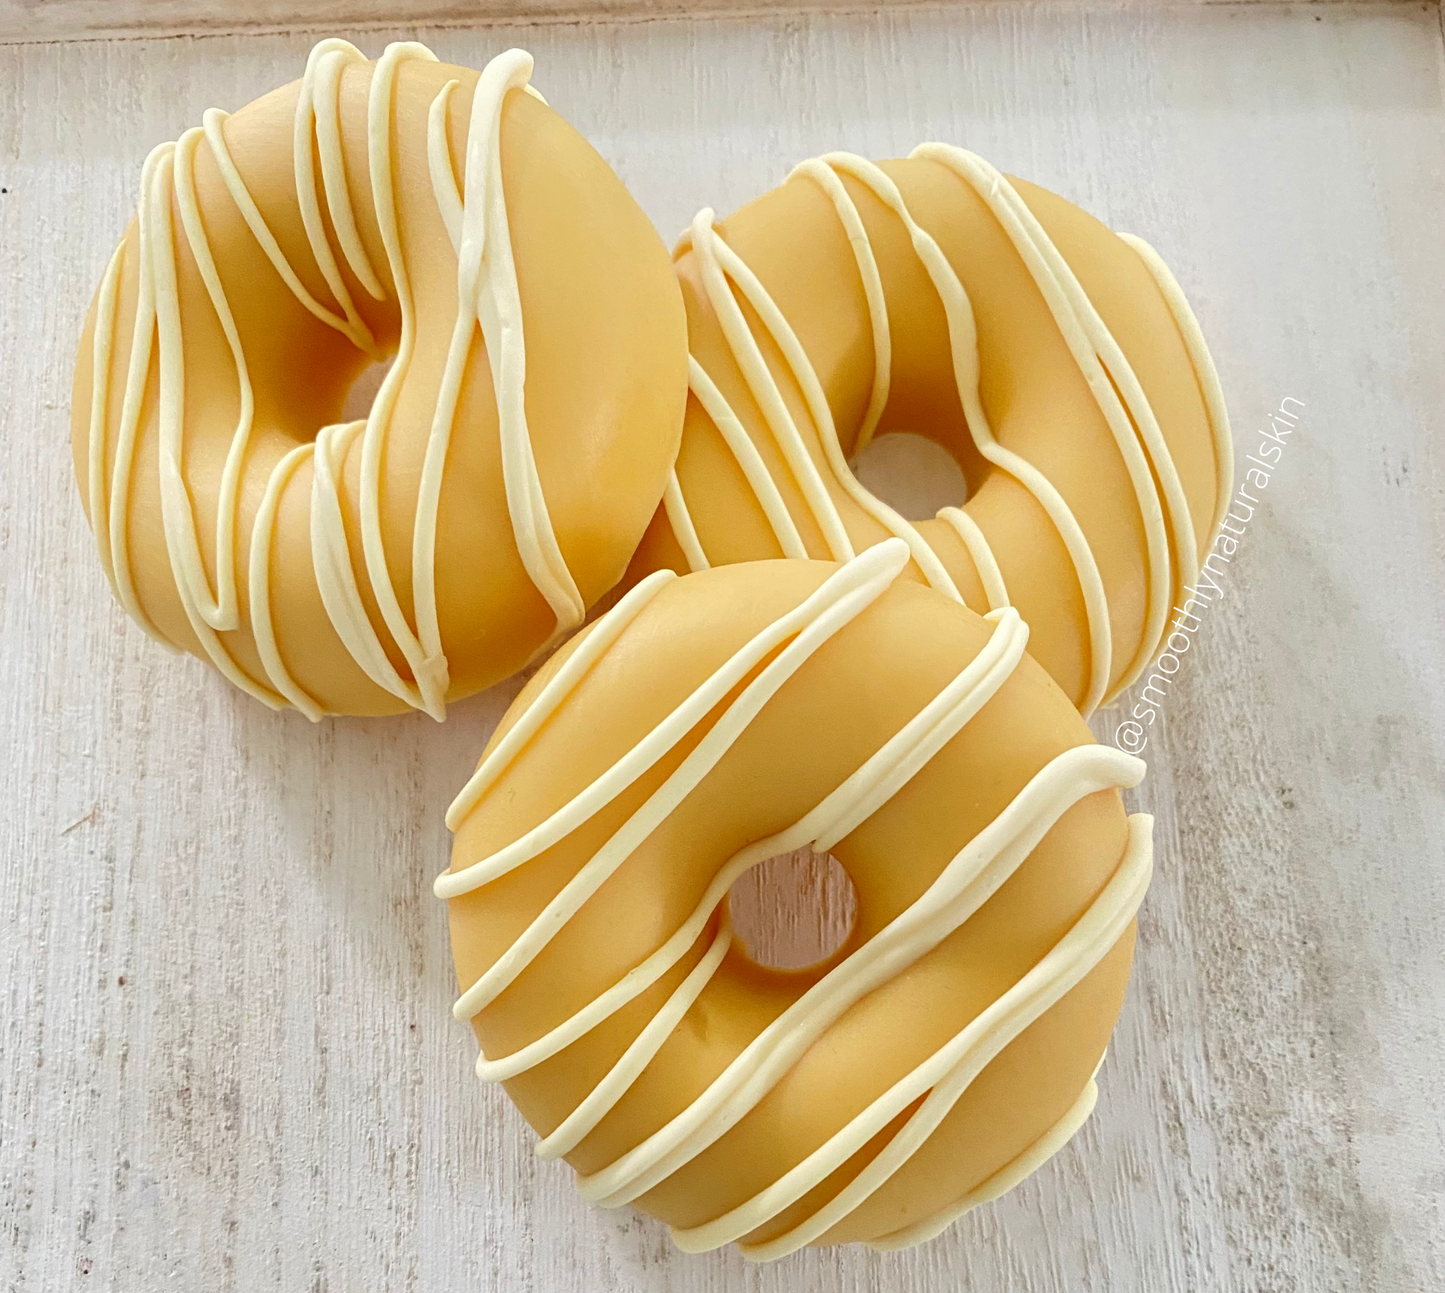 This lemon donut soap has the aroma of a freshly squeezed juicy lemon. Smoothly Natural Skin